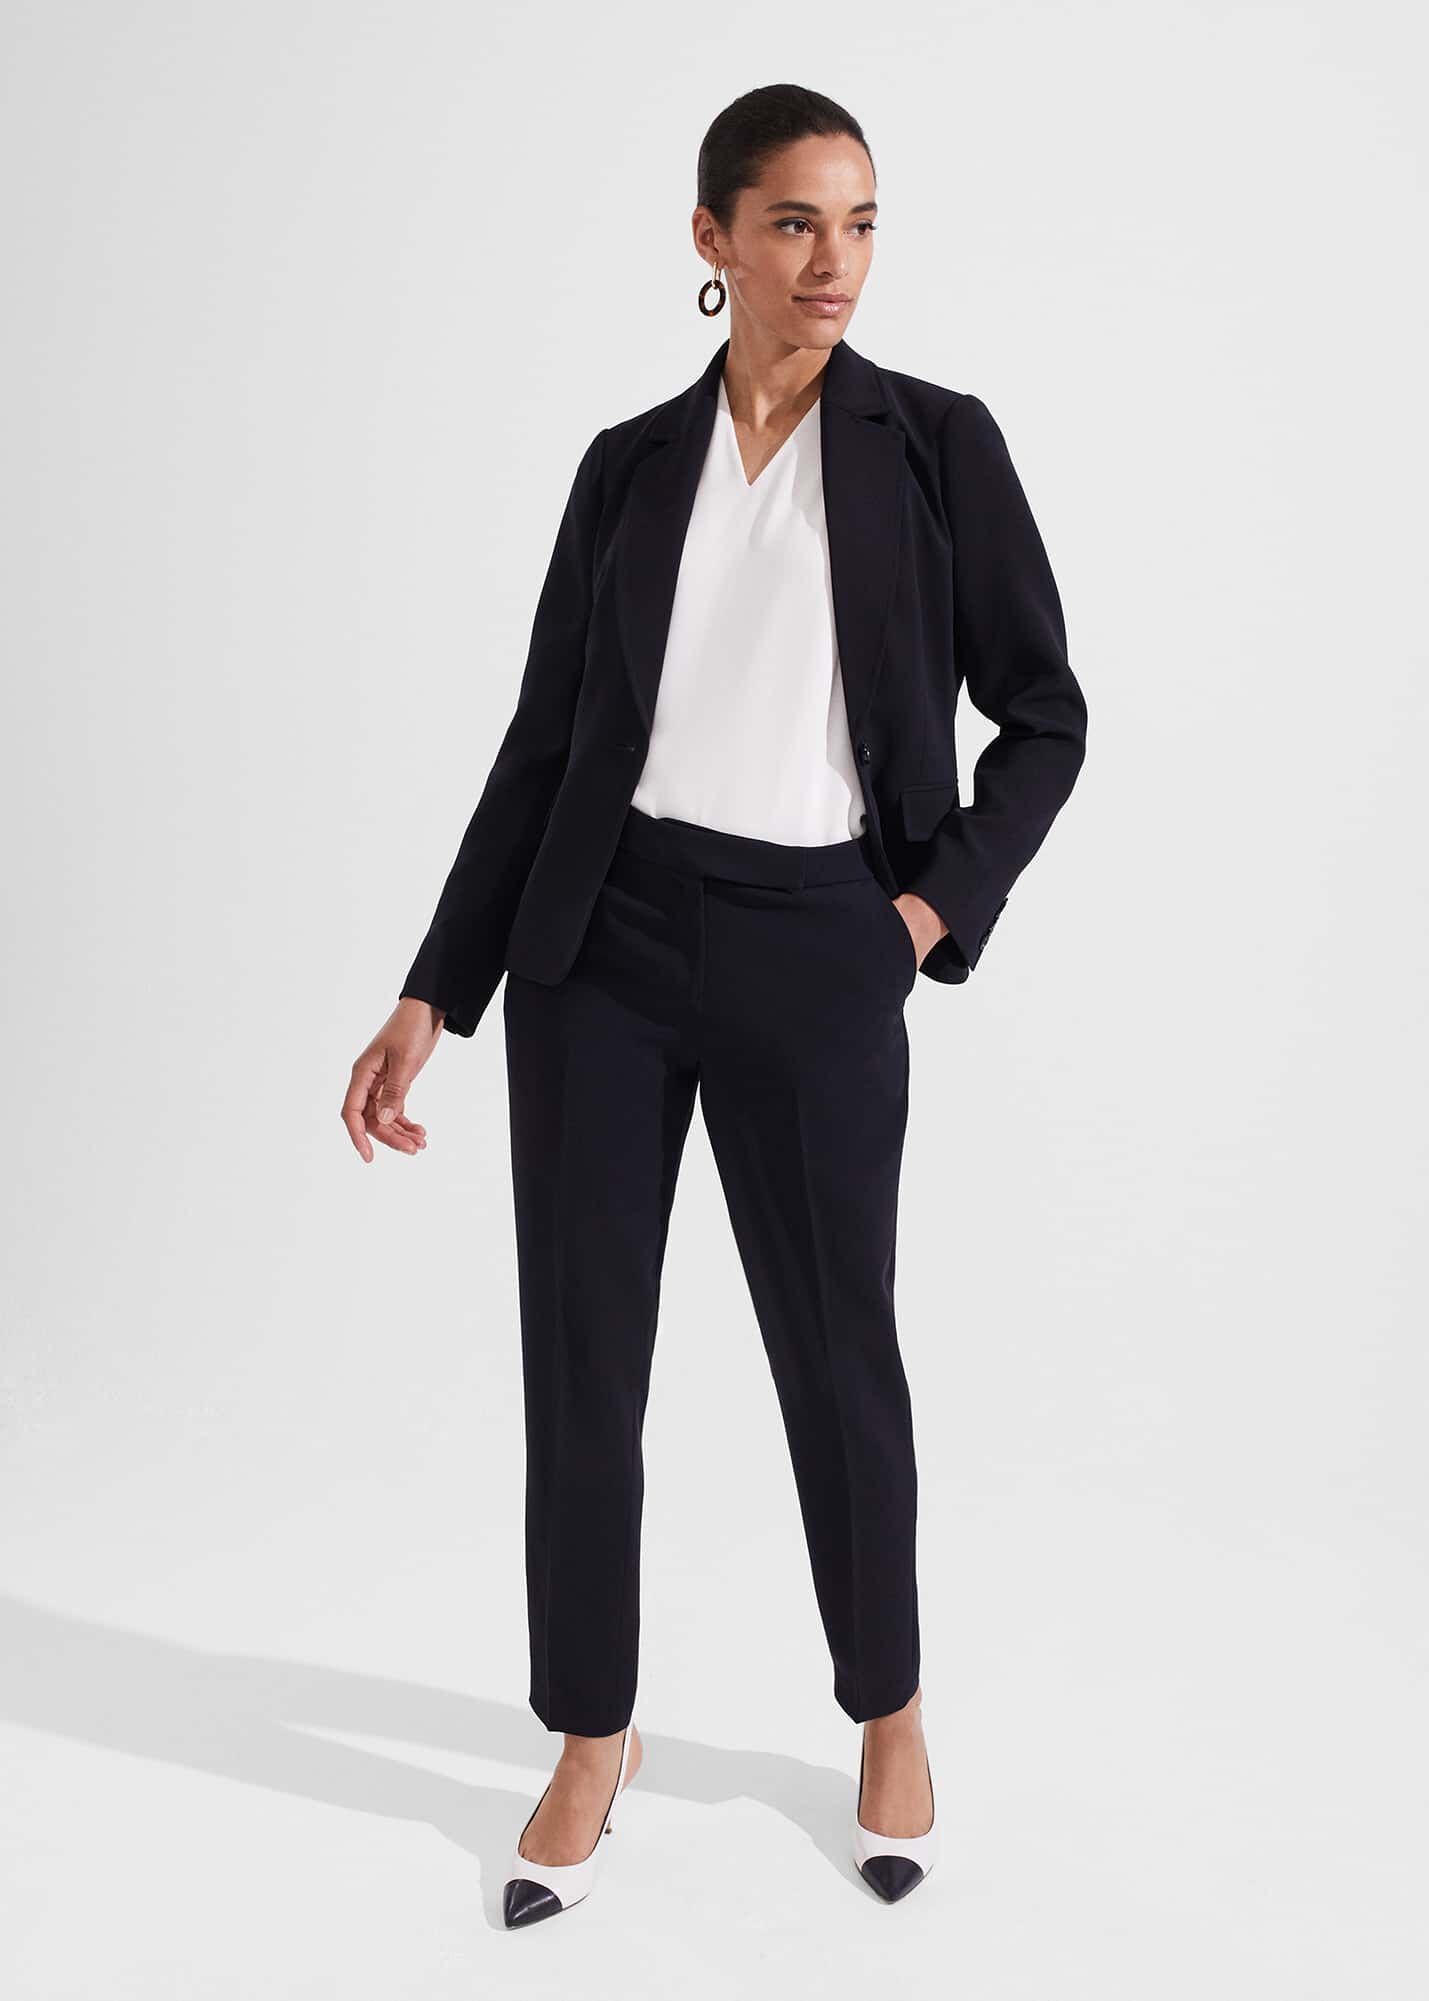 M&S' pink trouser suit is the perfect piece for now